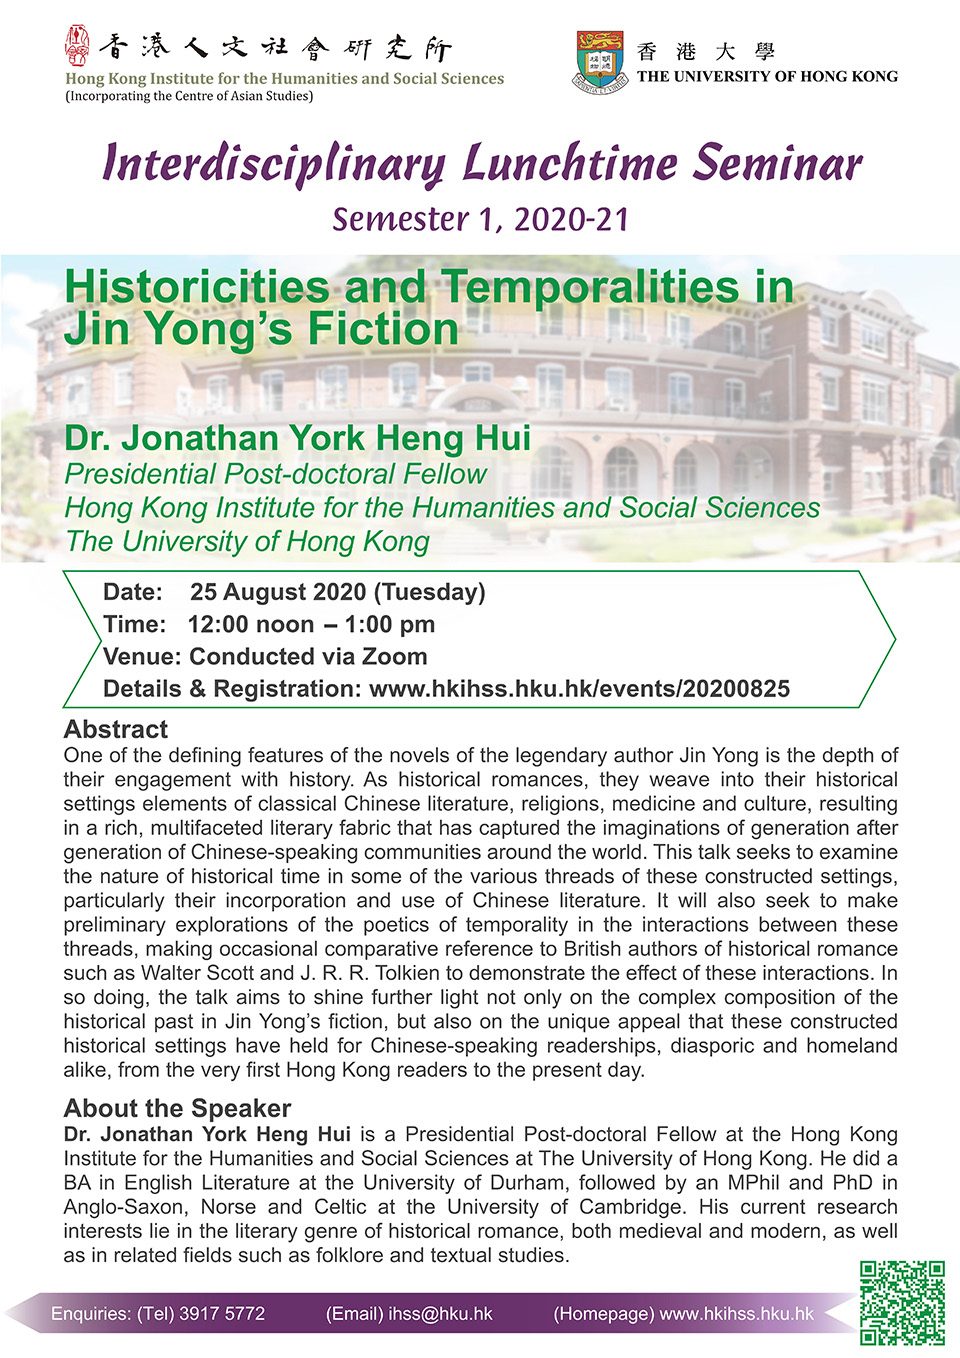 Interdisciplinary Lunchtime Seminar on “Historicities and Temporalities in Jin Yong’s Fiction” by Dr. Jonathan York Heng Hui (August 25, 2020)